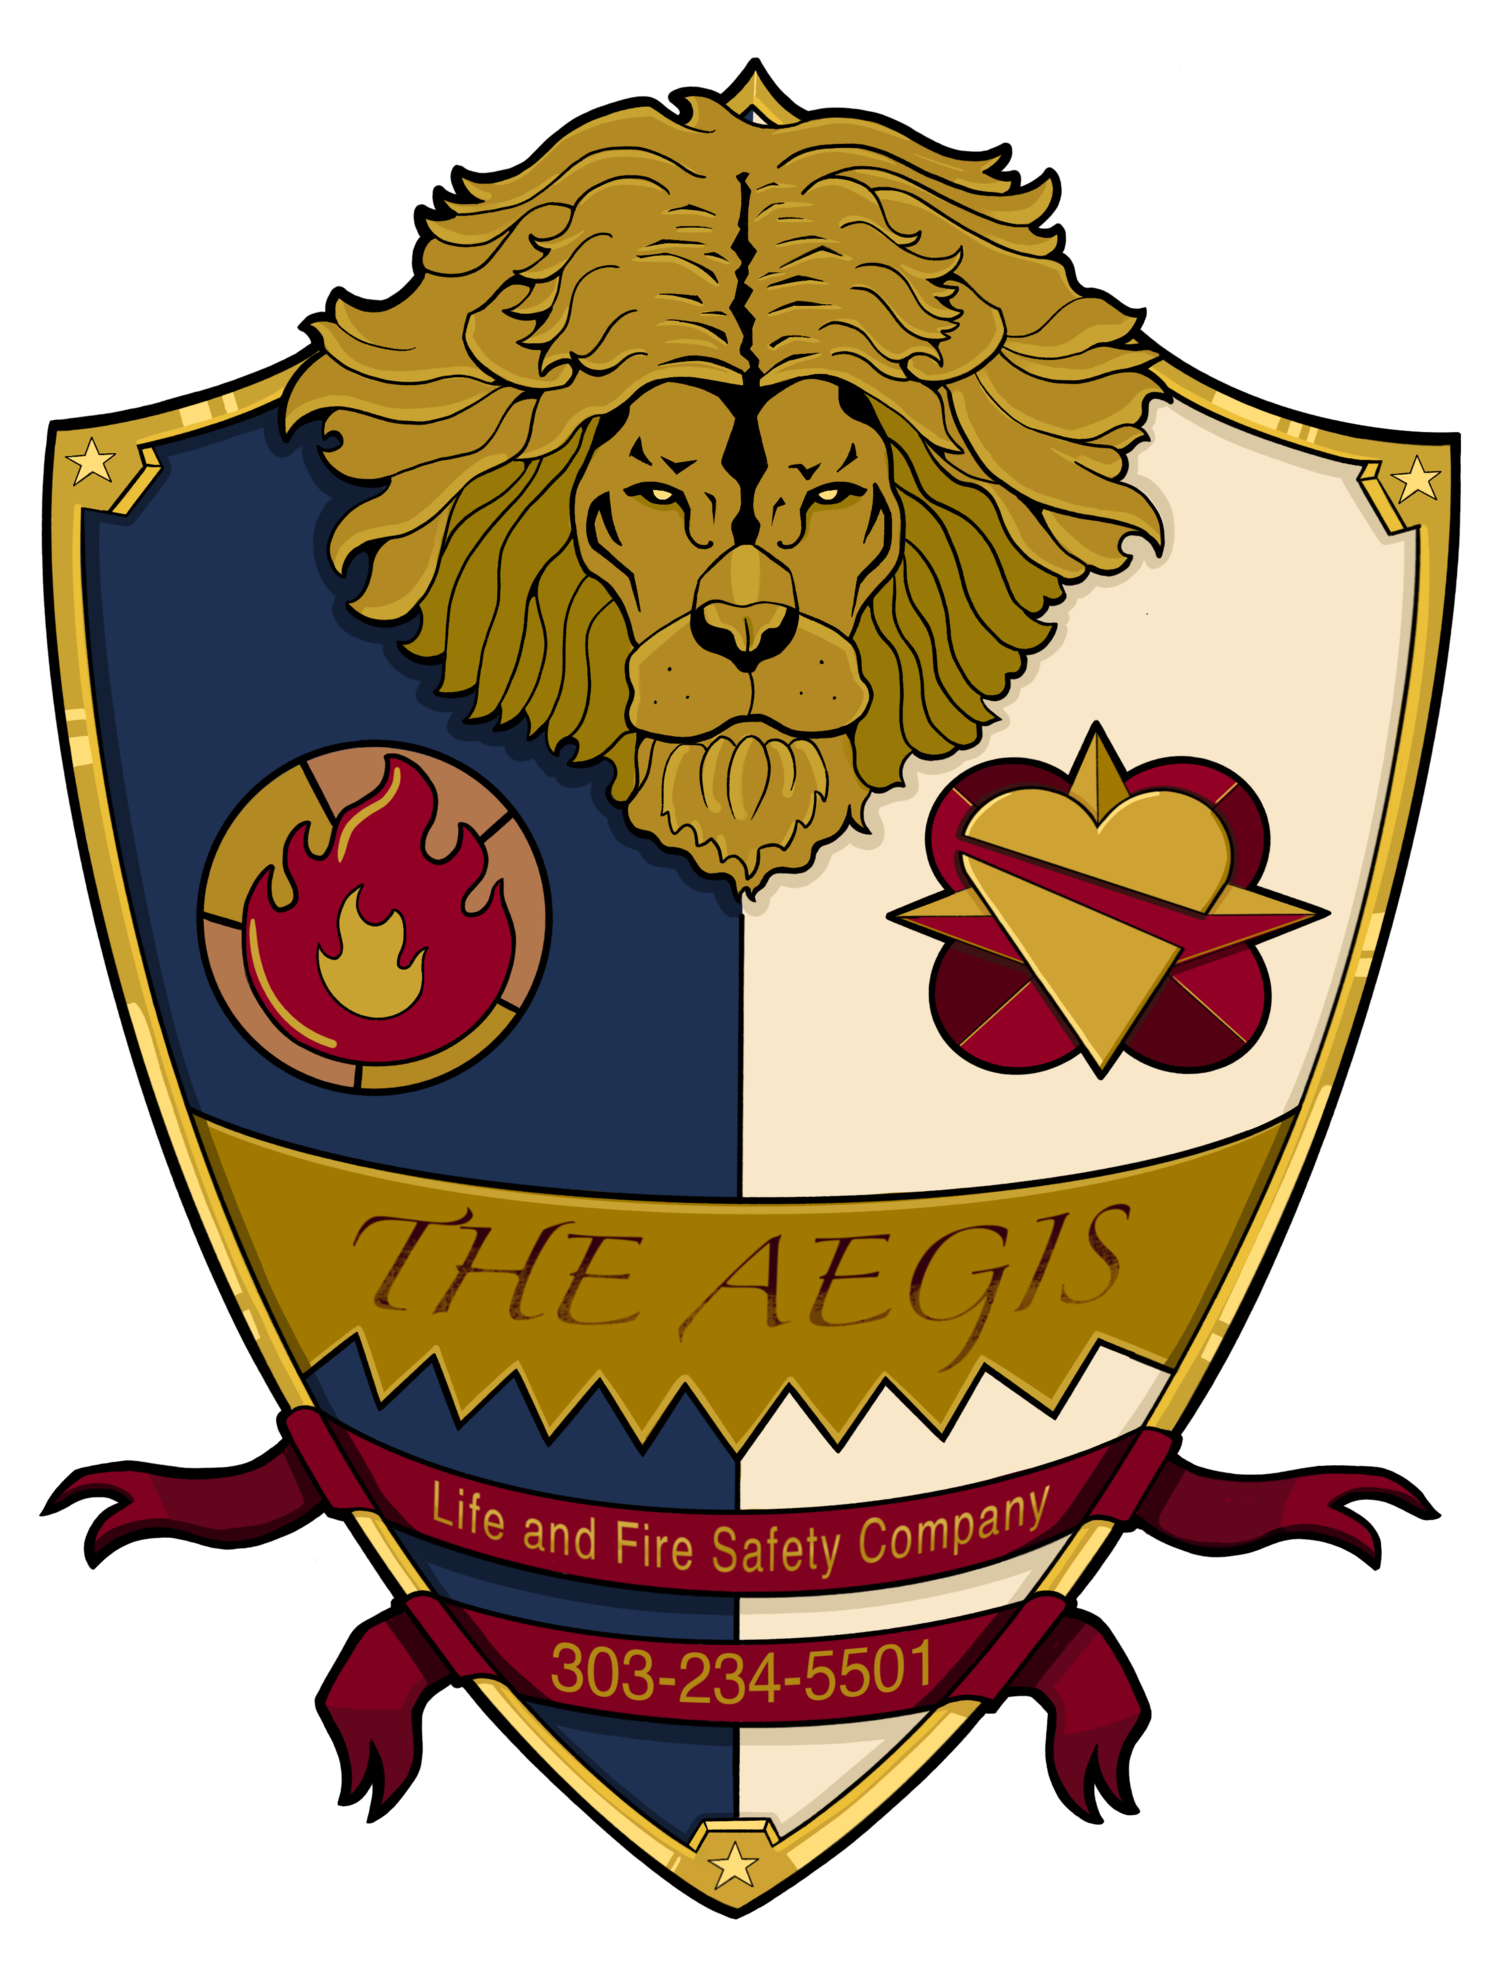 Aegis Life and Fire Safety Co.